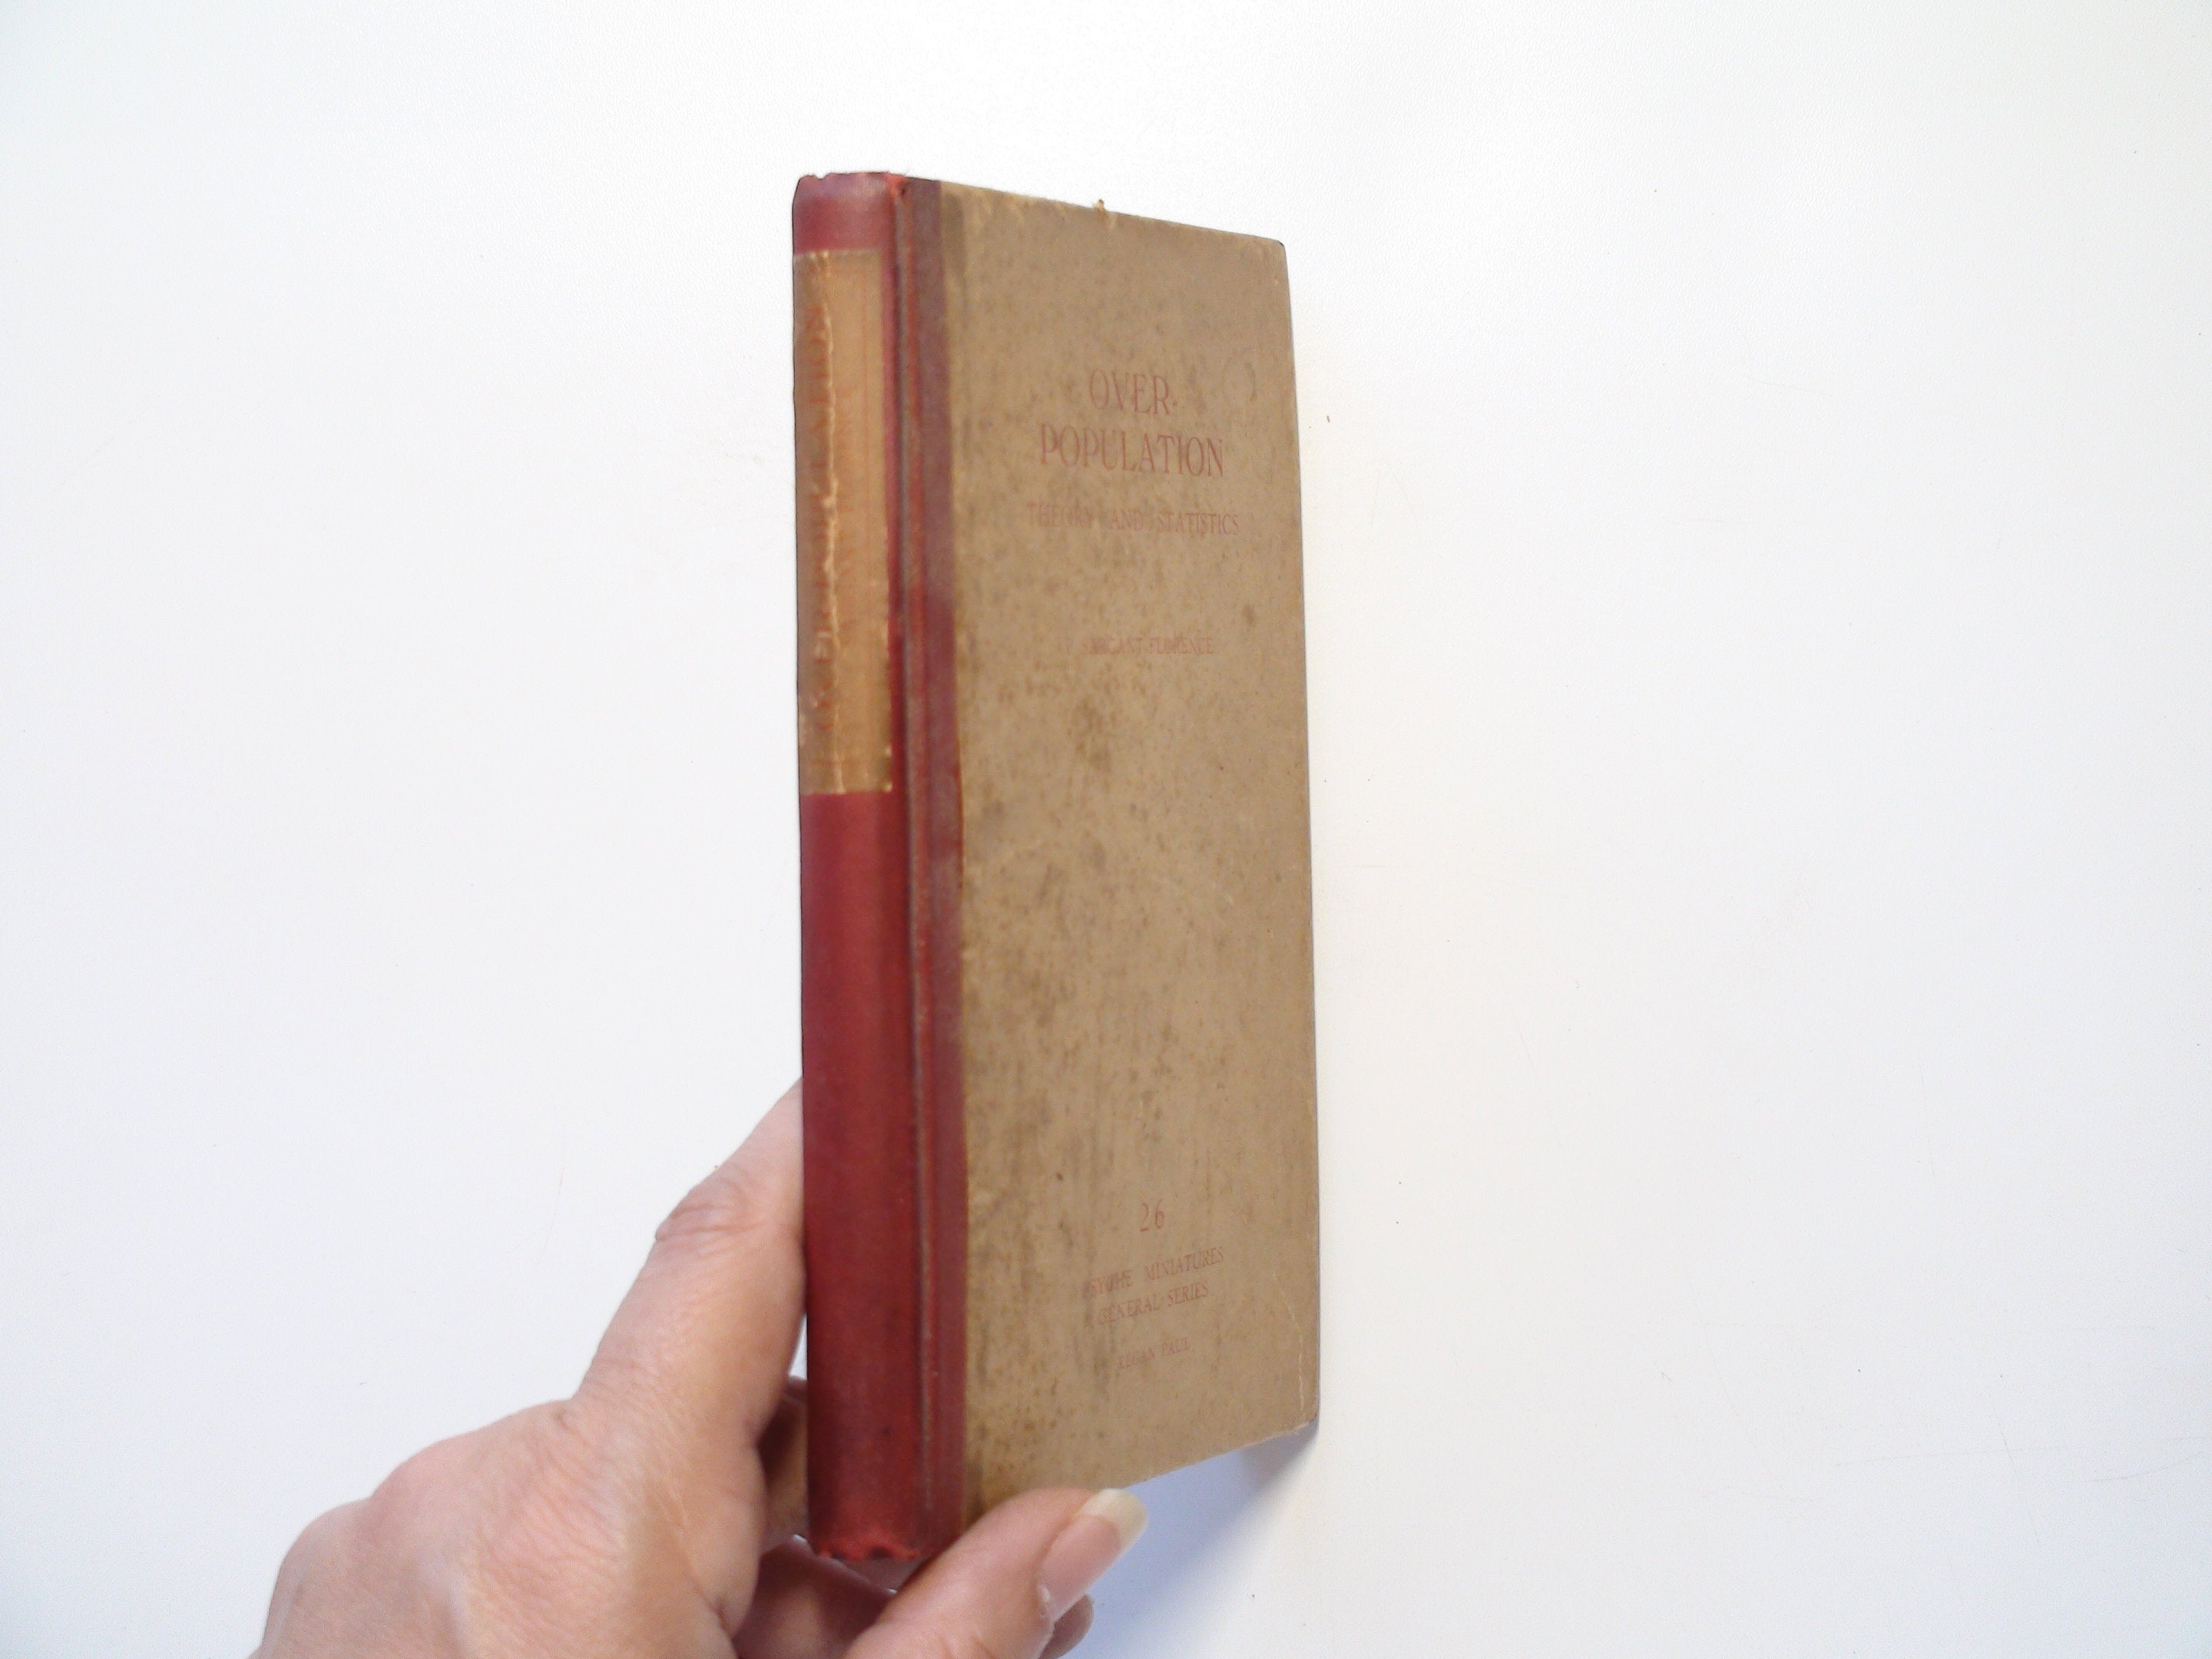 Over-Population Theory and Statistics, by P. Sargant Florence, 1st Ed, 1926